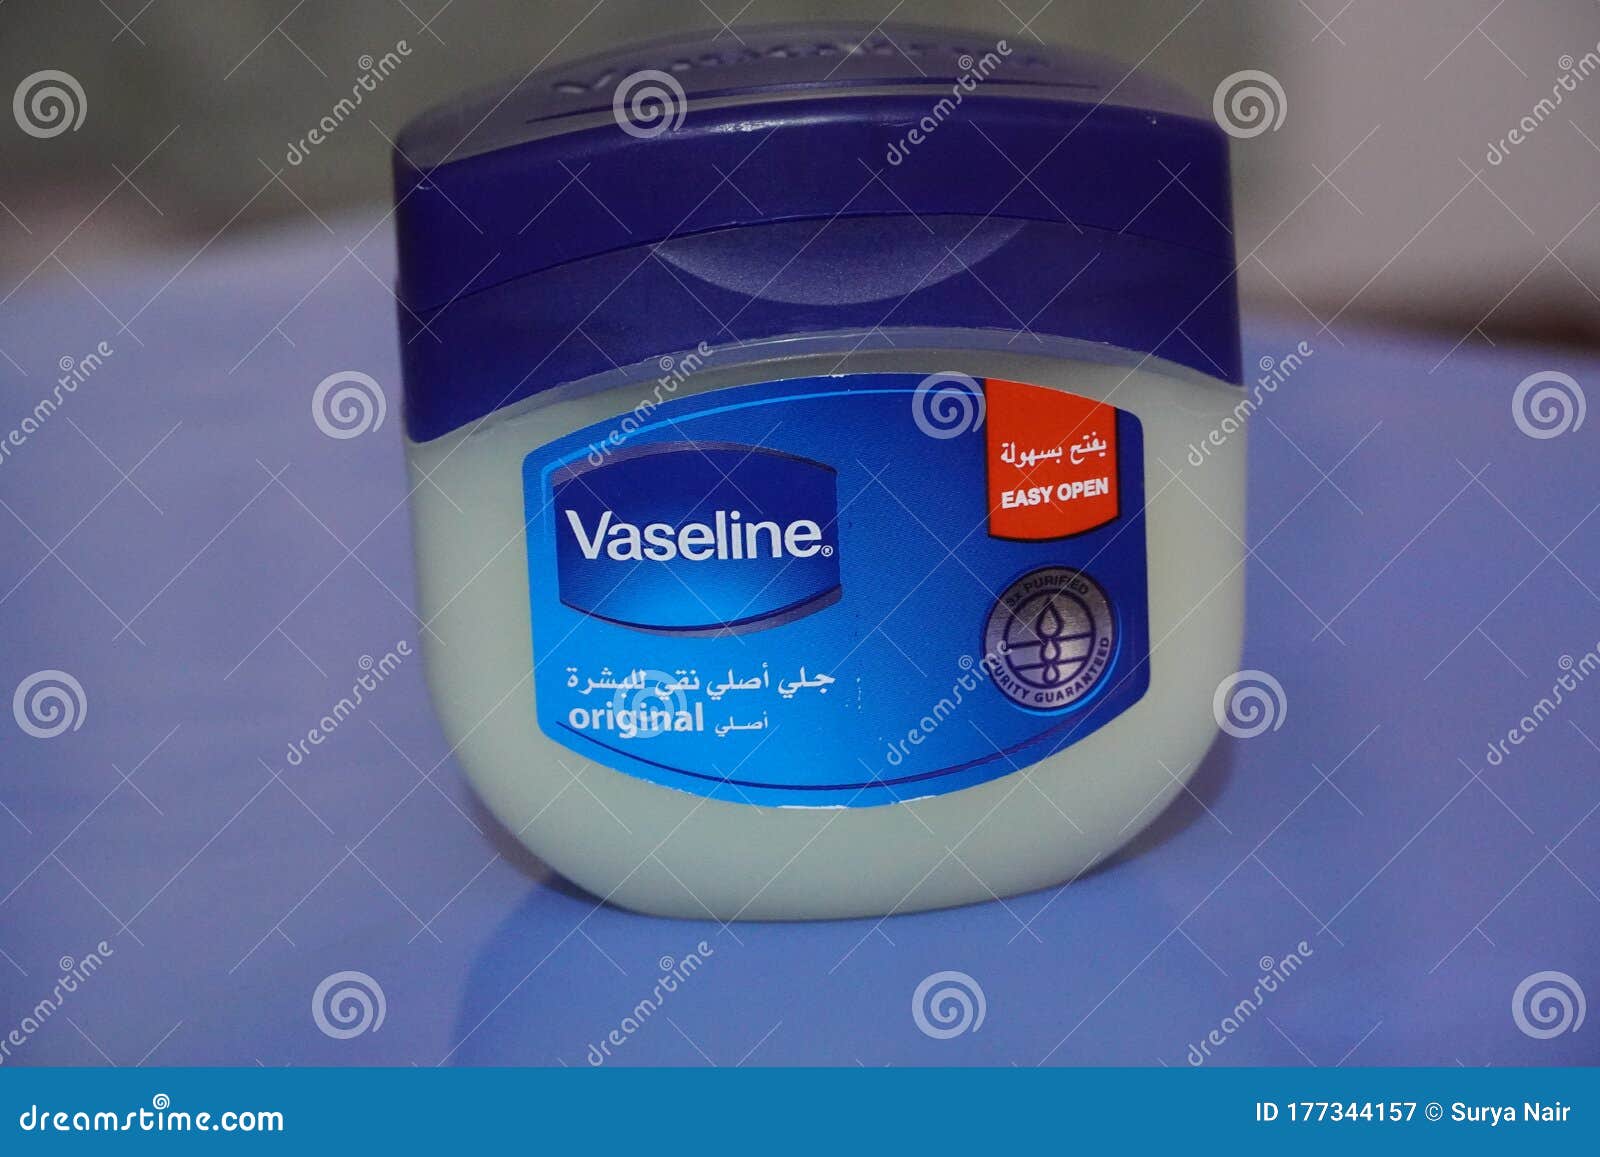 large-tub-vaseline-petroleum-jelly-isolated-blue-background-jar-which-used-as-over-counter-topical-ointment-ml-dubai-177344157.jpg